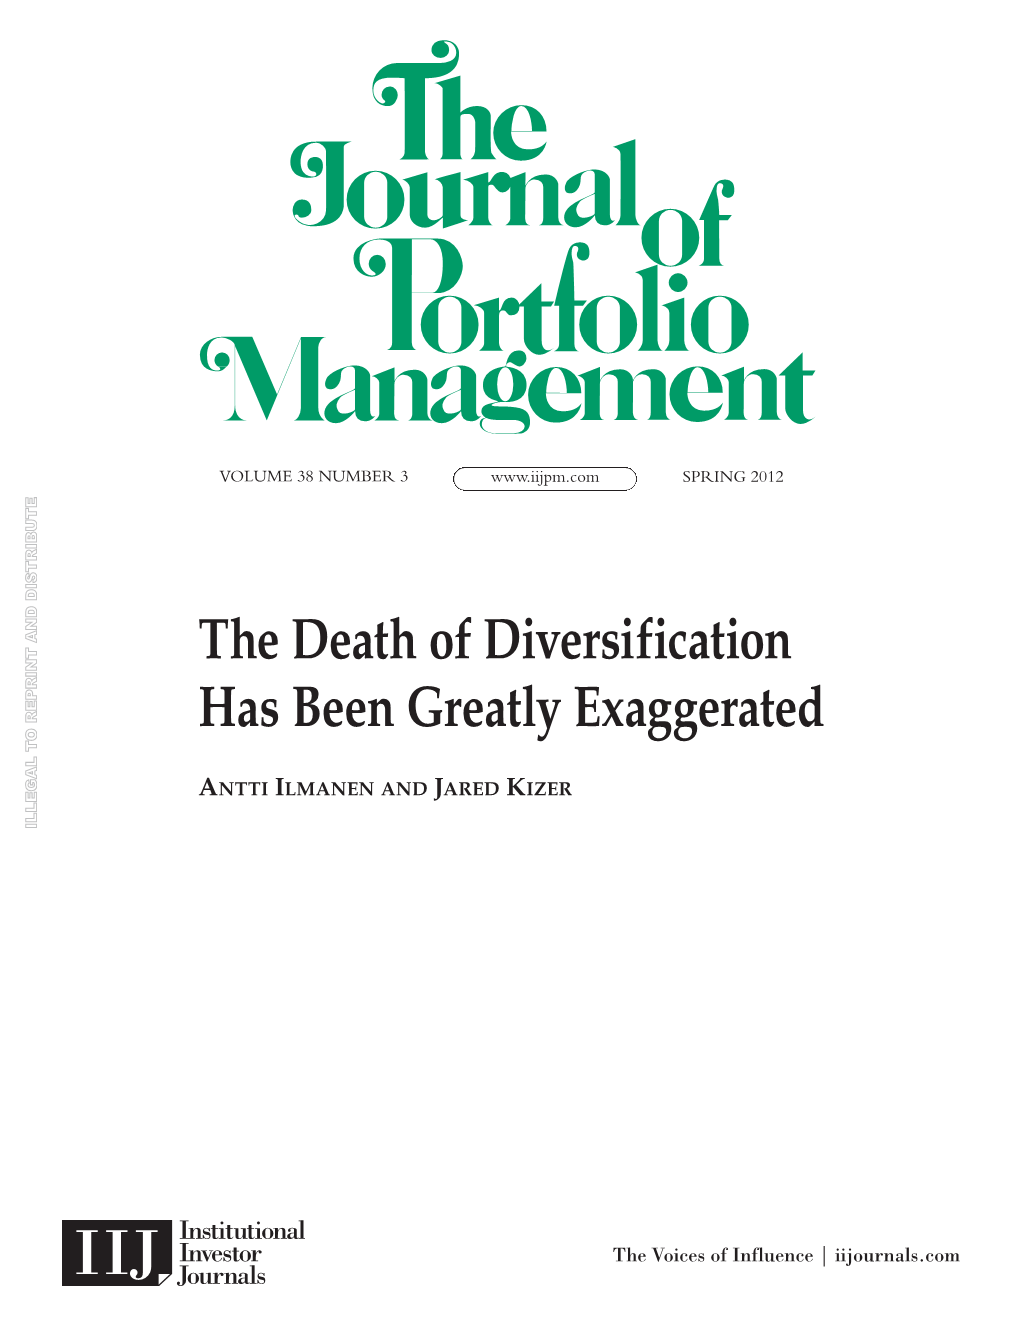 The Death of Diversification Has Been Greatly Exaggerated